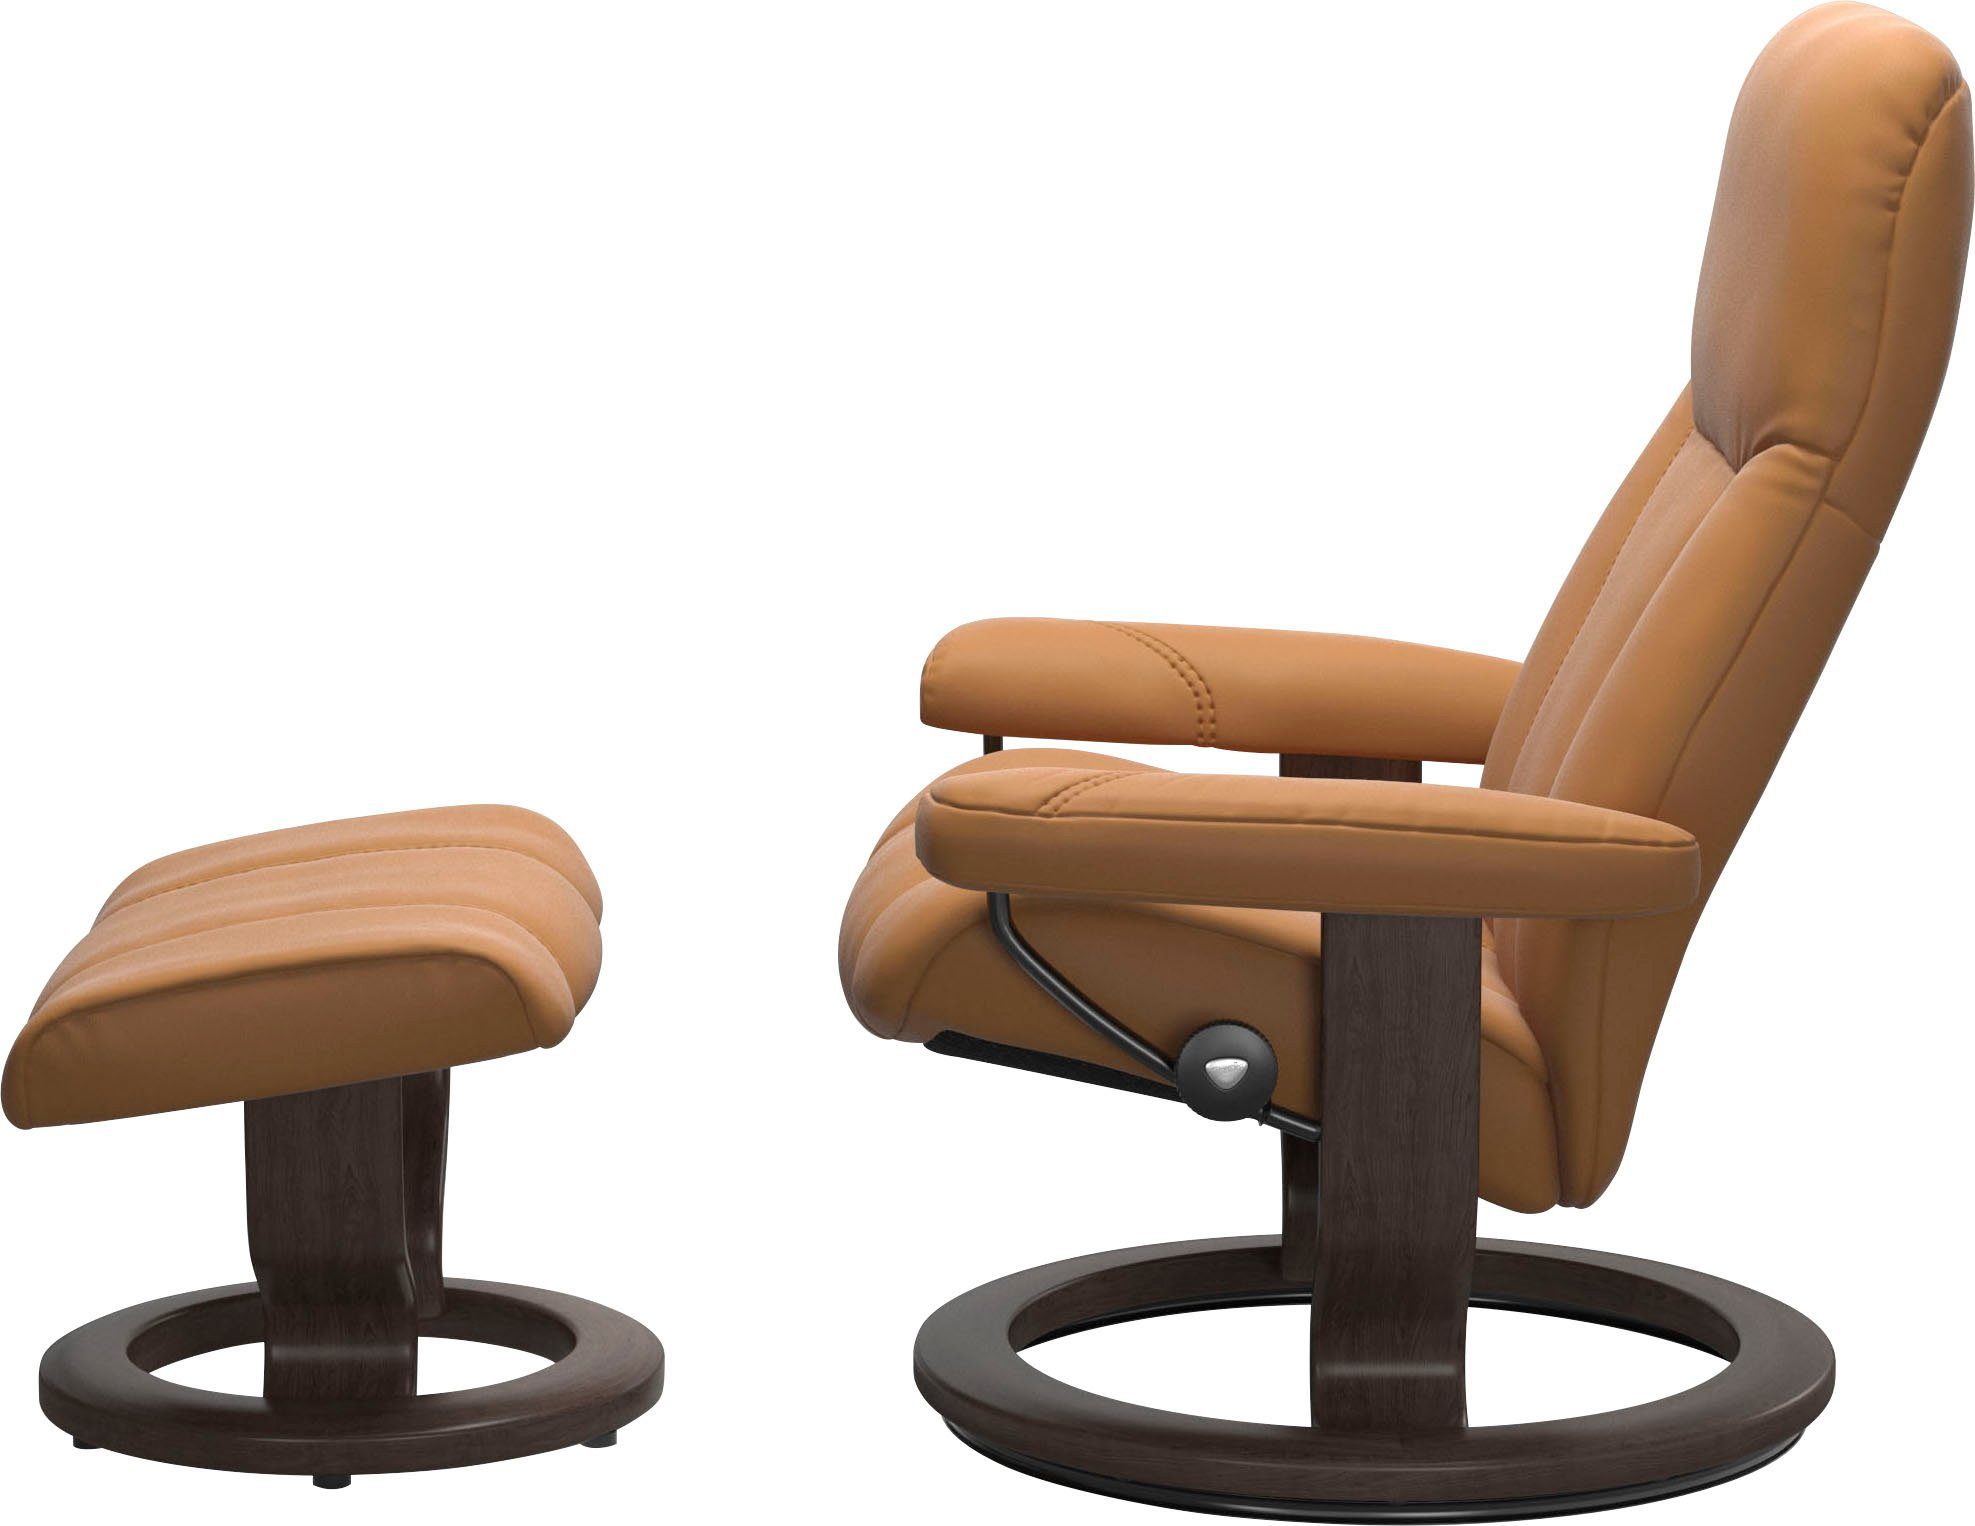 Stressless® Relaxsessel Gestell Größe M, Classic Base, Consul, Wenge mit